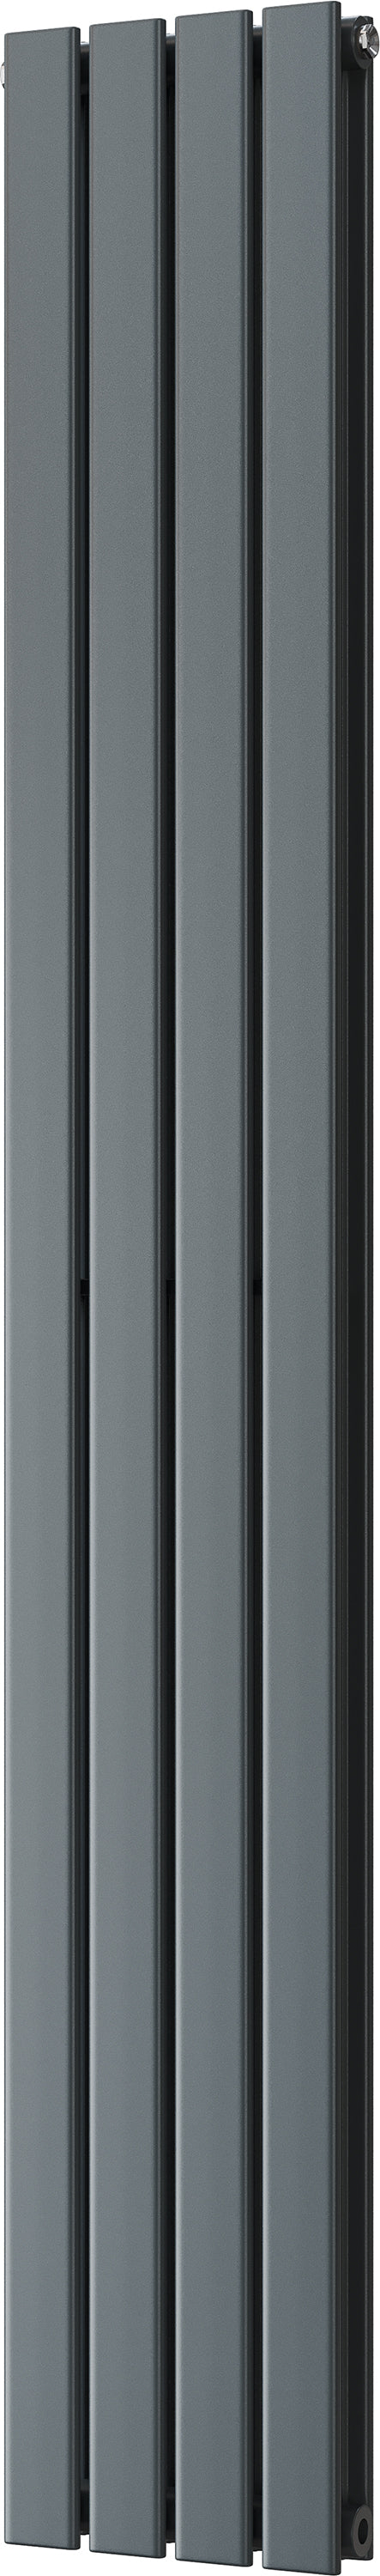 Typhoon - Anthracite Vertical Radiator H1800mm x W272mm Double Panel